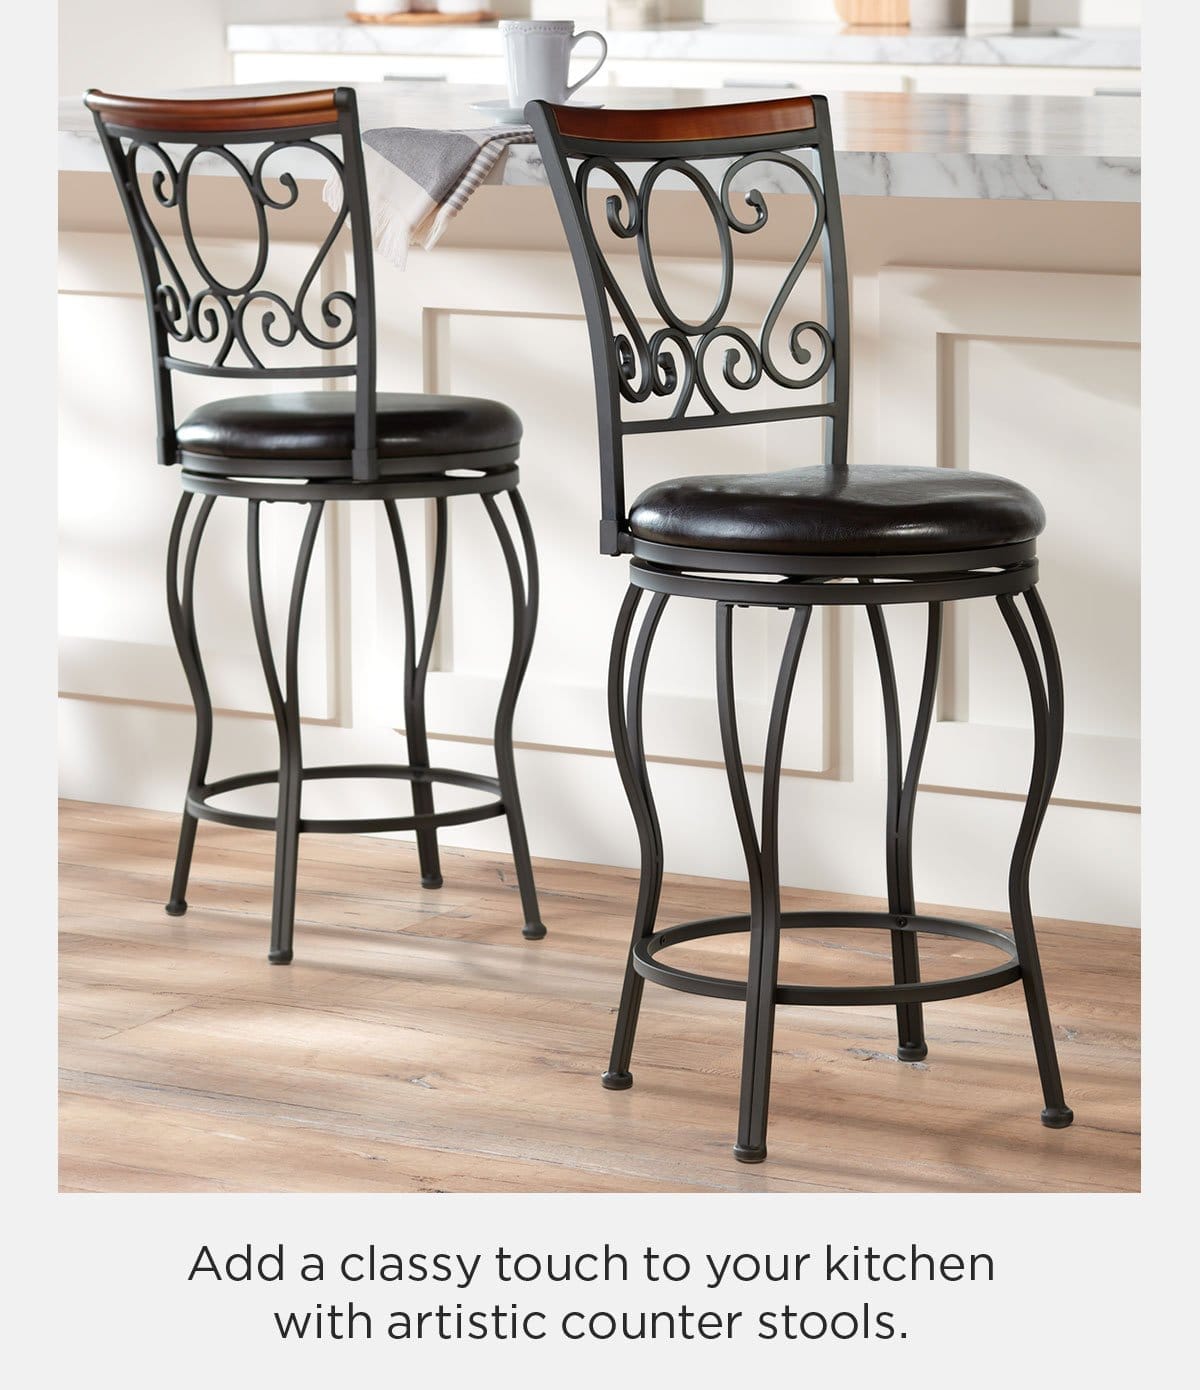 Add a classy touch to your kitchen with artistic counter stools.